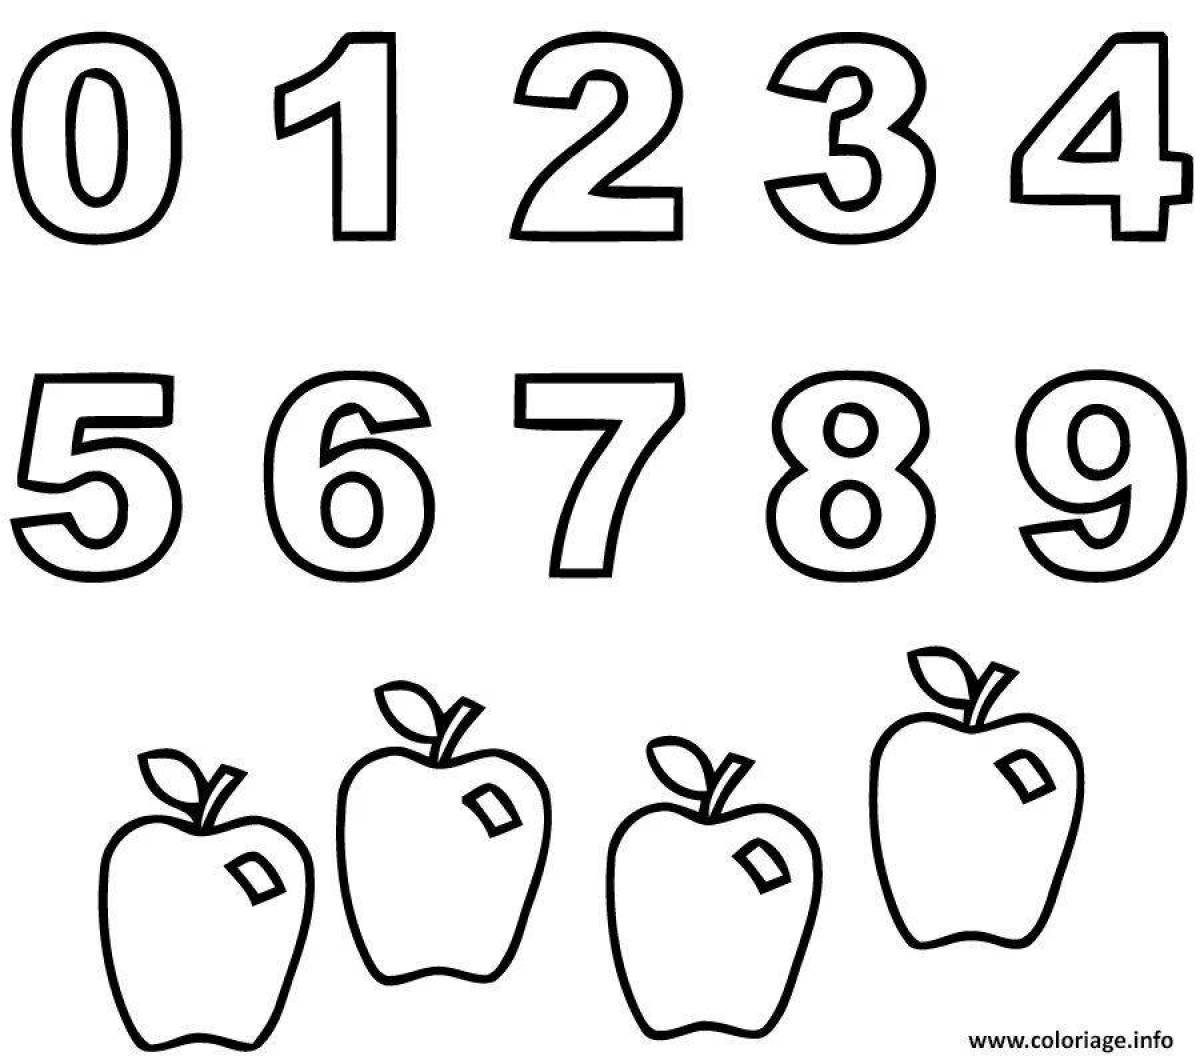 Luminous coloring pages with numbers and letters